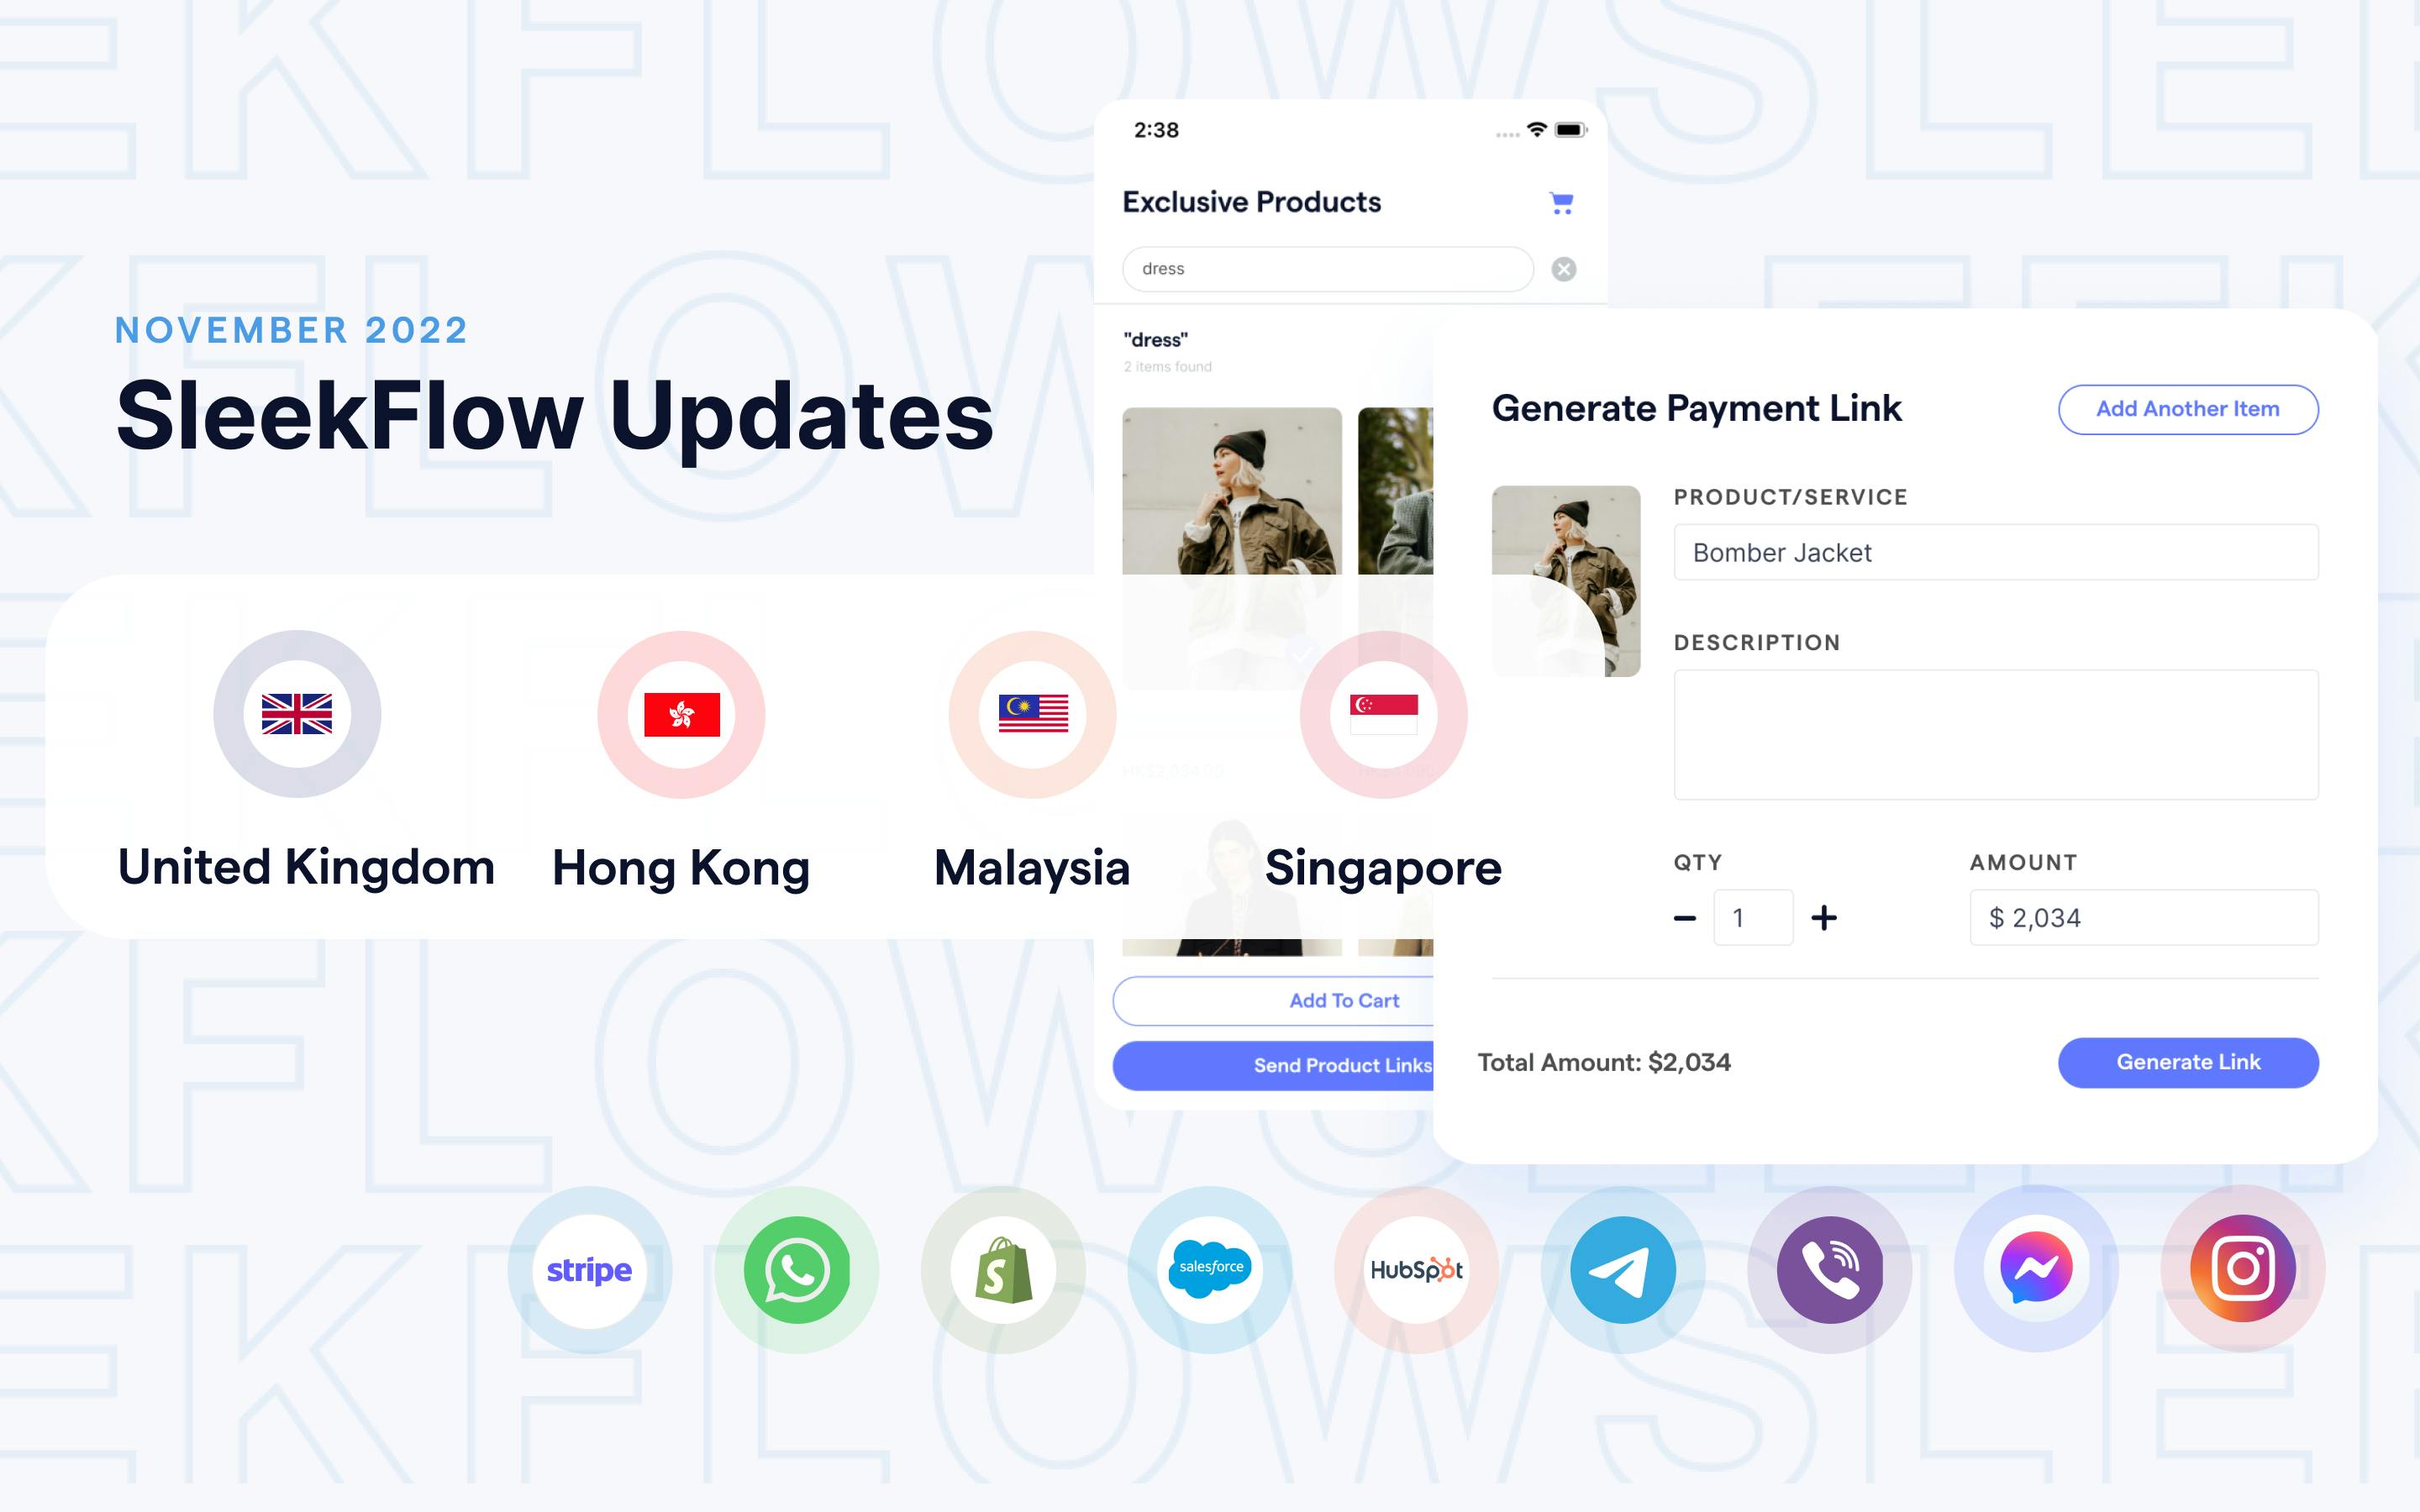 What’s new in SleekFlow: Payment Link is here in Singapore, Malaysia, and the UK